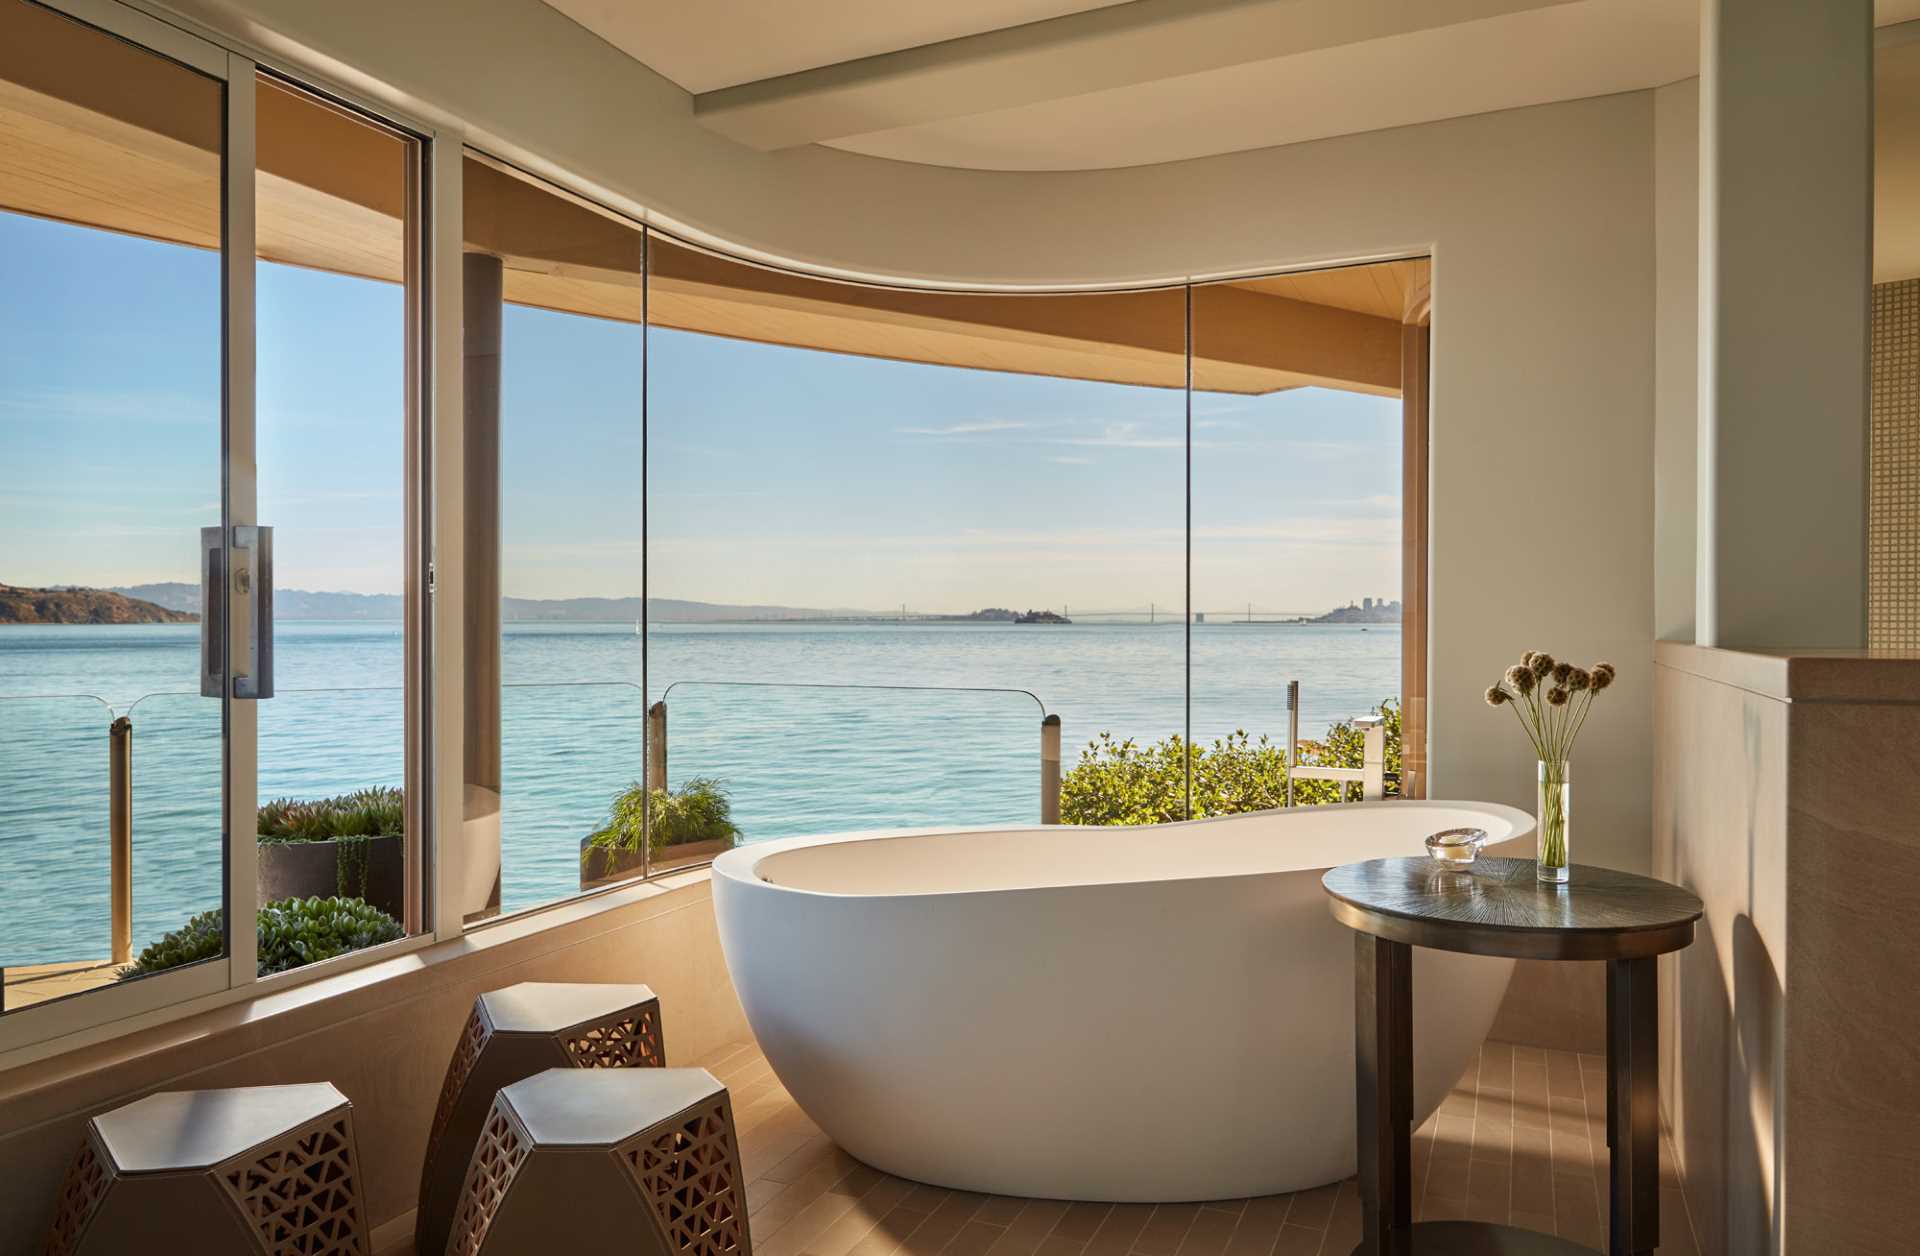 A modern bathroom with a freestanding bathtub positioned in front of curved windows.